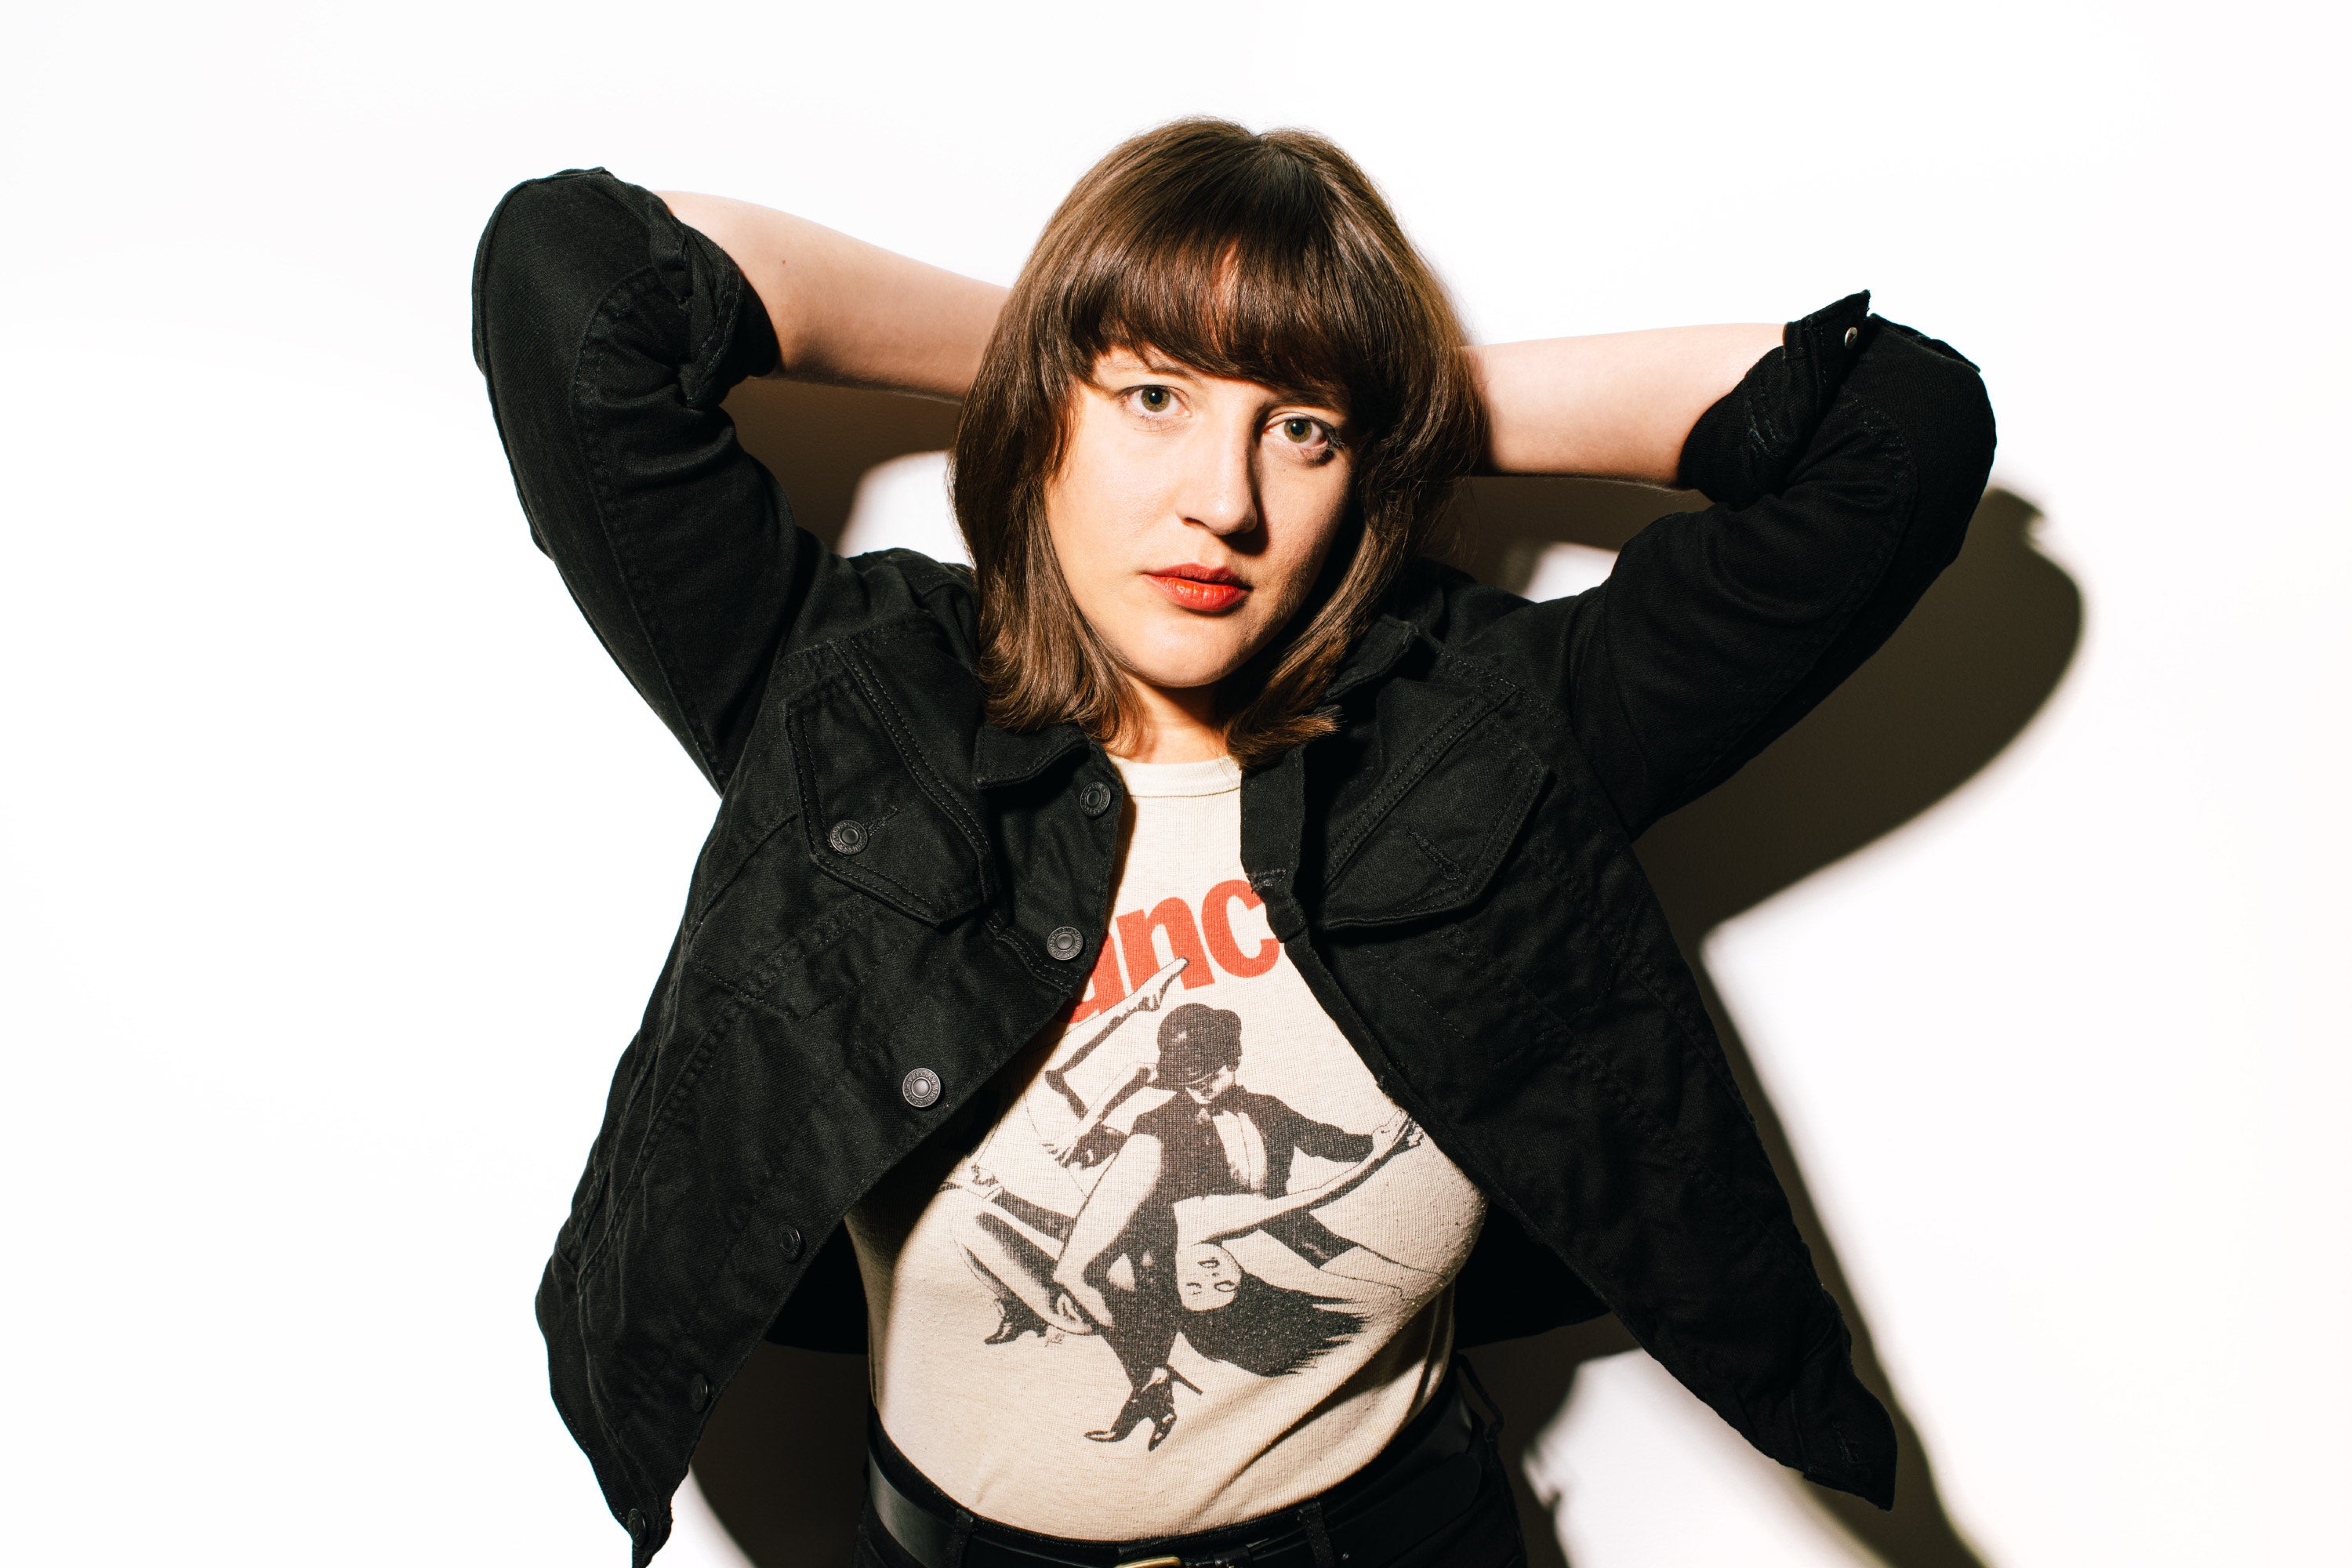 A woman with short brown hair stands against a white wall, wearing a Bob Fosse T-shirt.